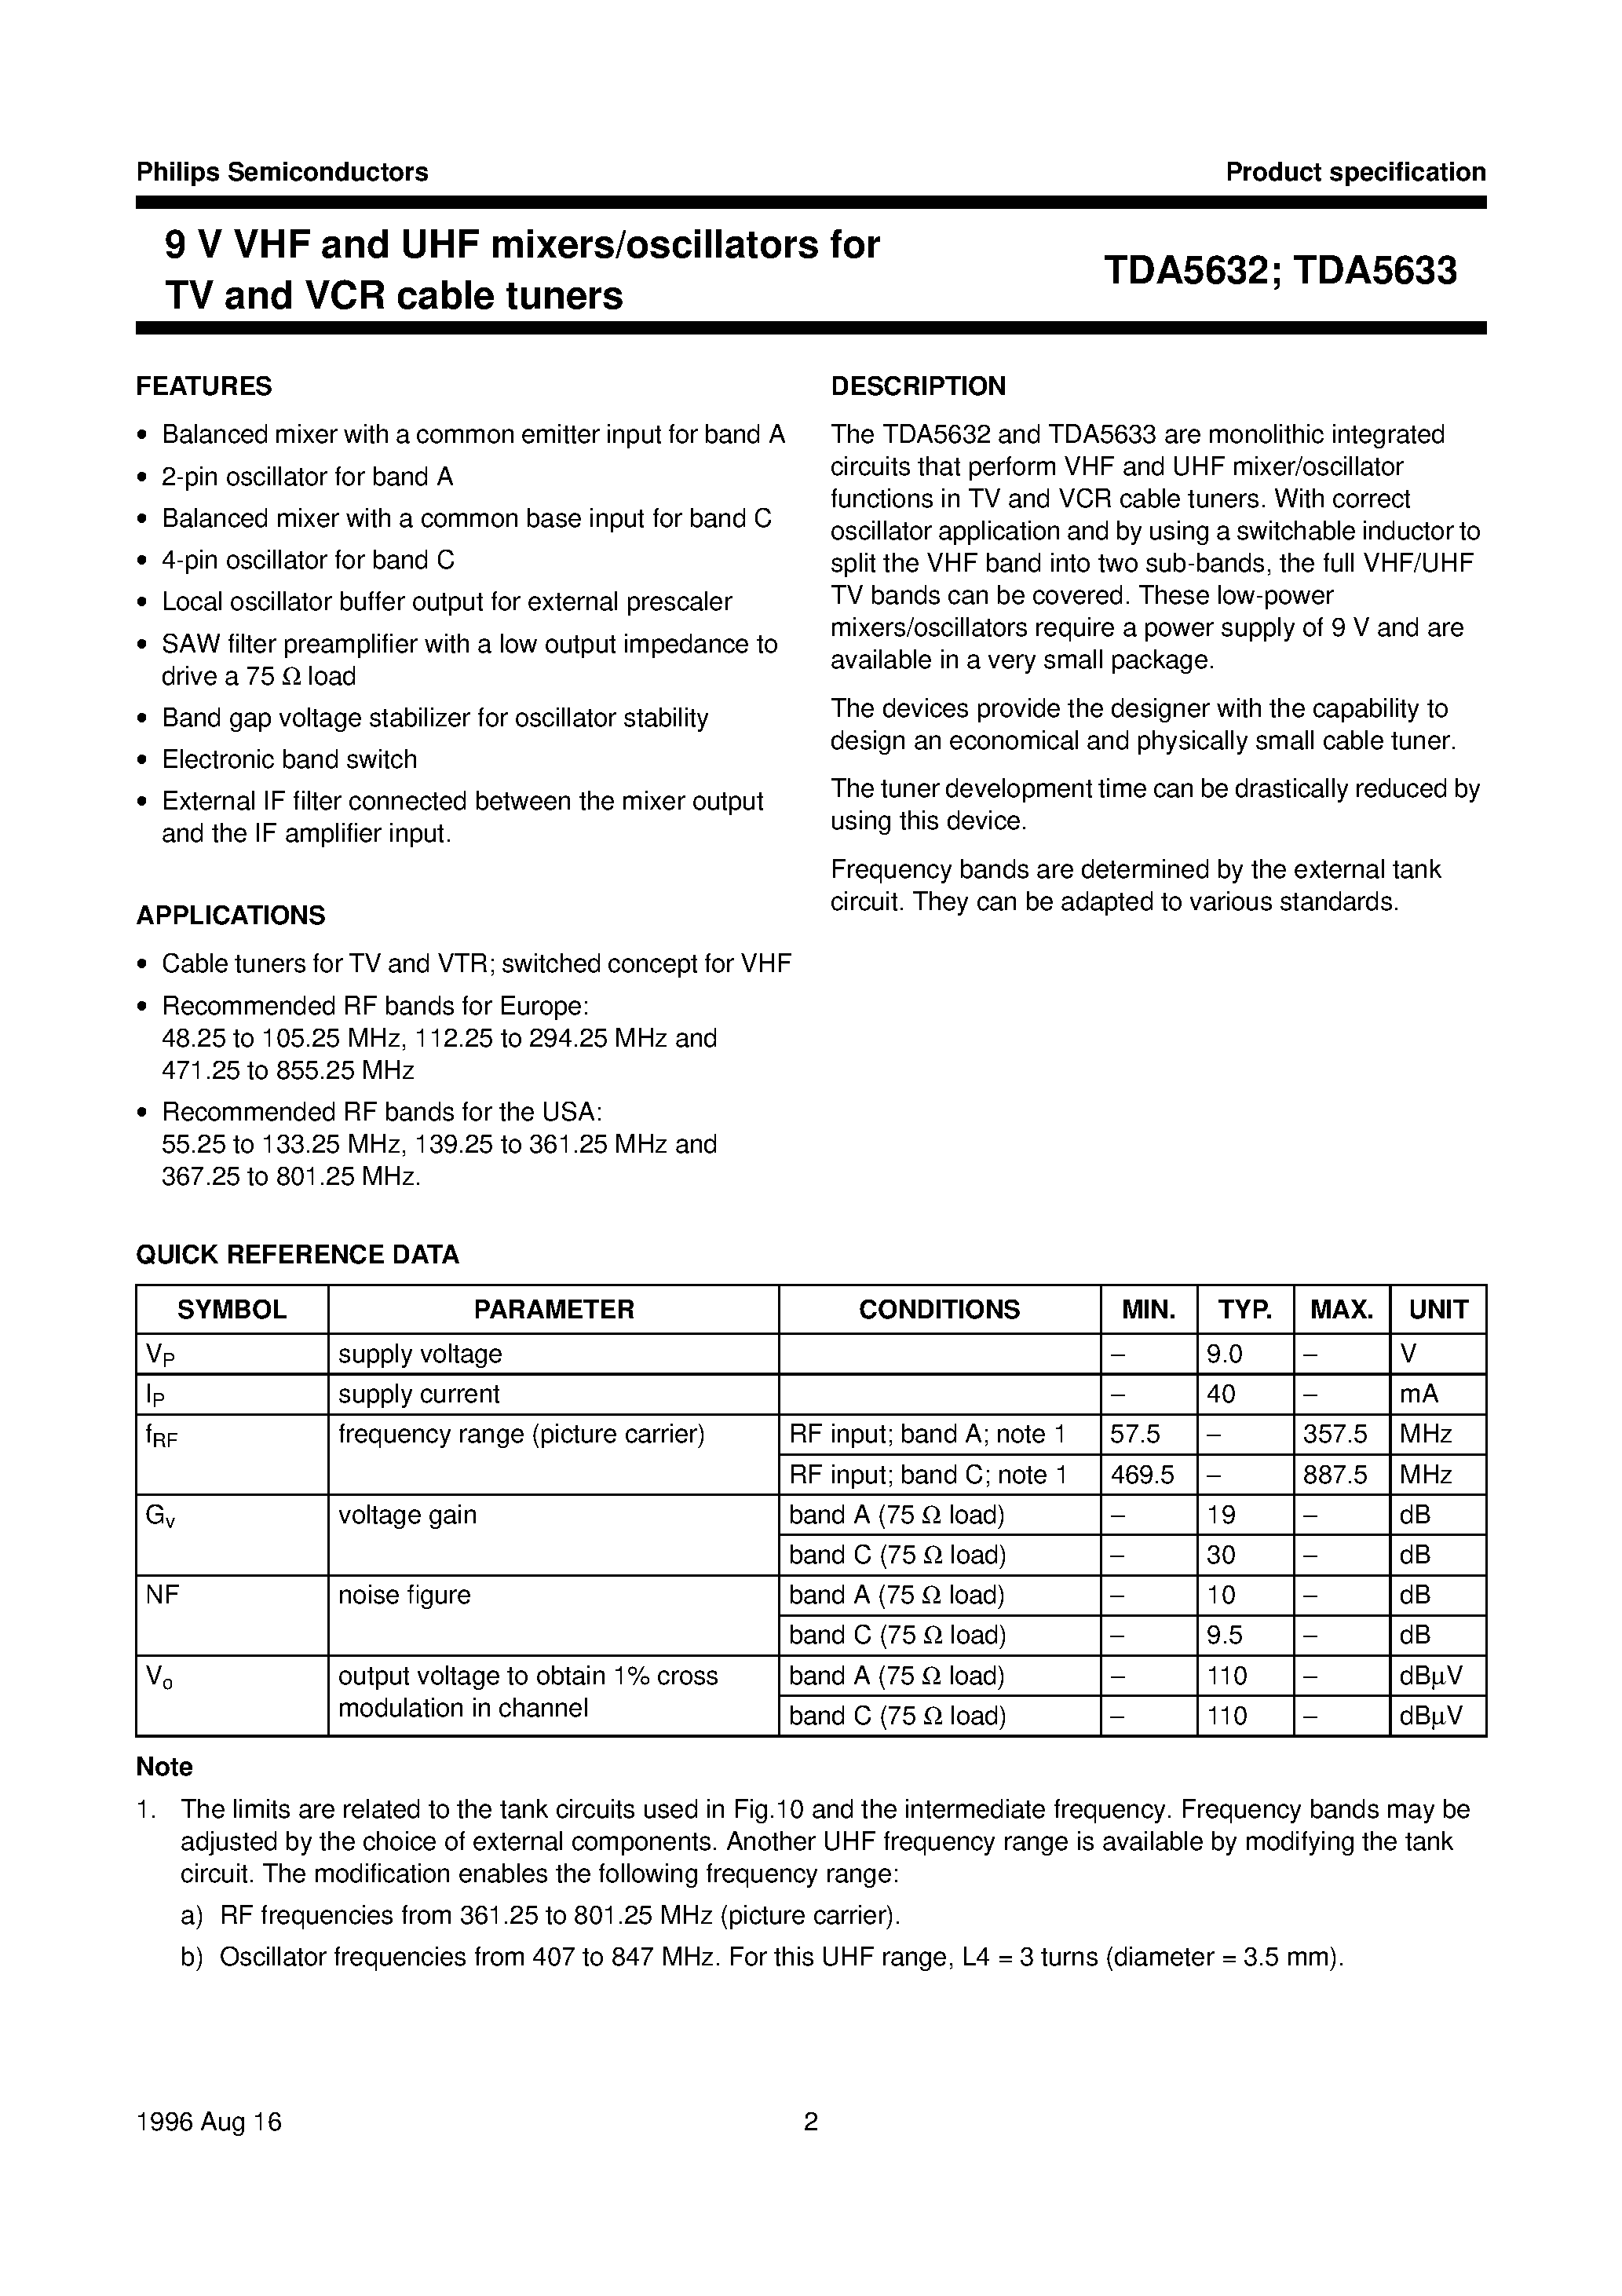 Datasheet TDA5633M - 9 V VHF and UHF mixers/oscillators for TV and VCR cable tuners page 2